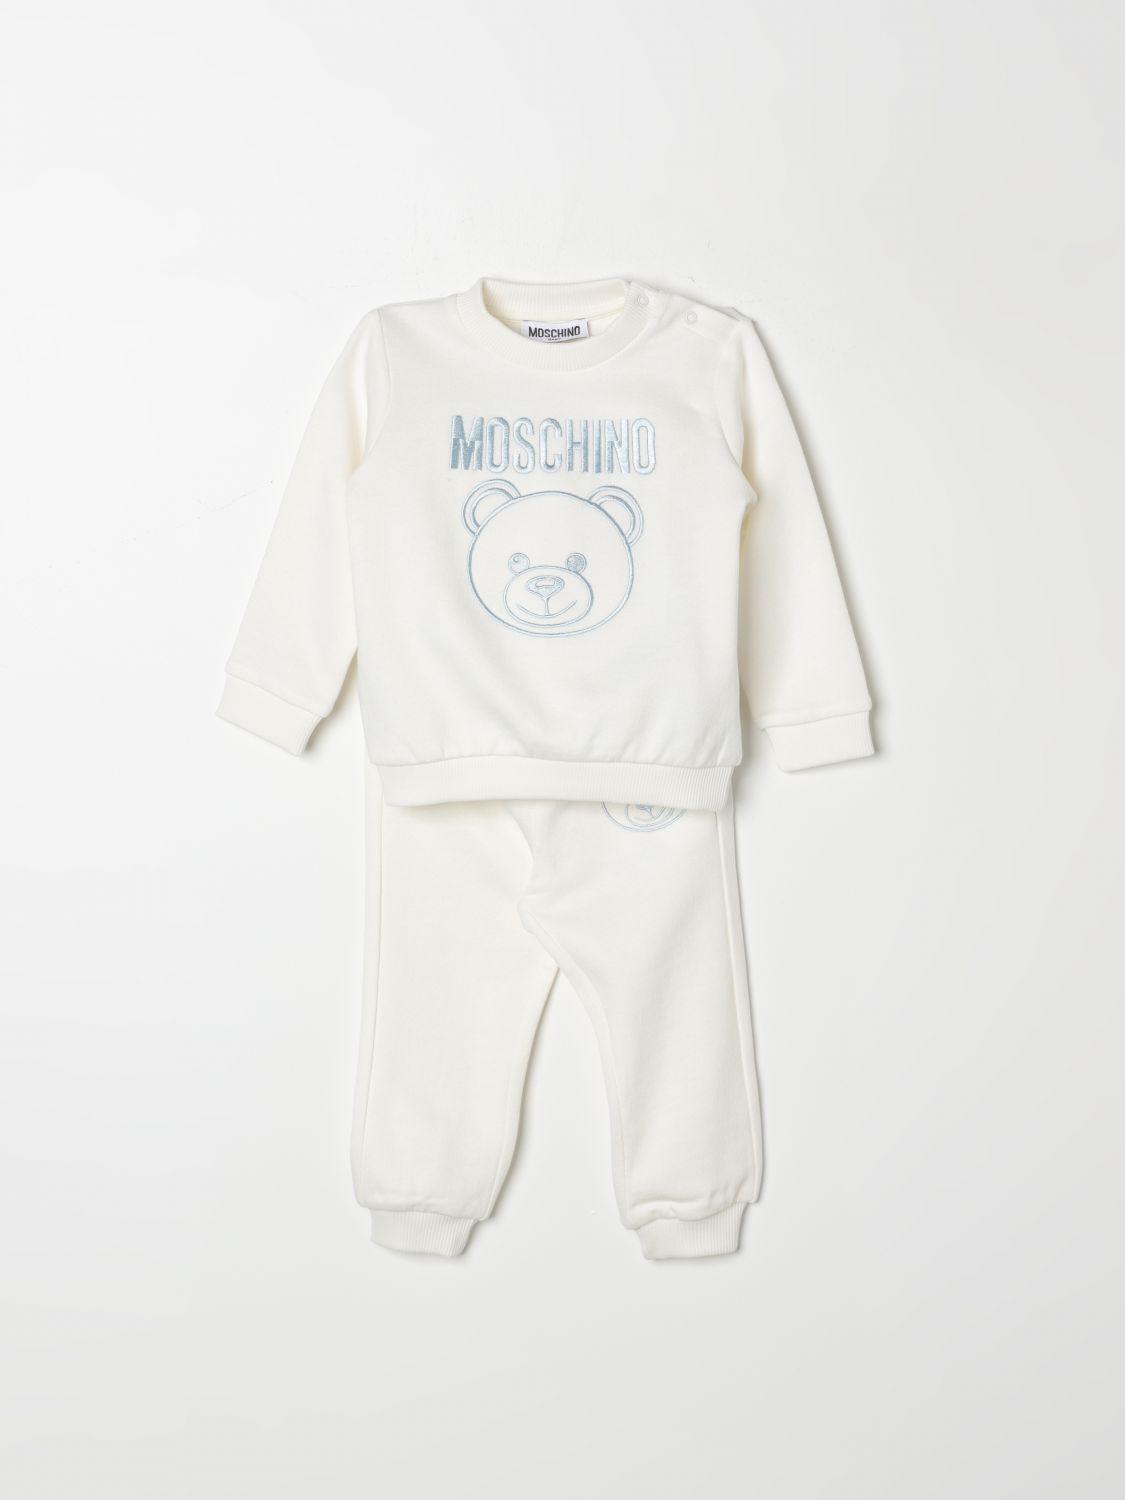 Moschino Baby Tracksuits  Kids Color Sky